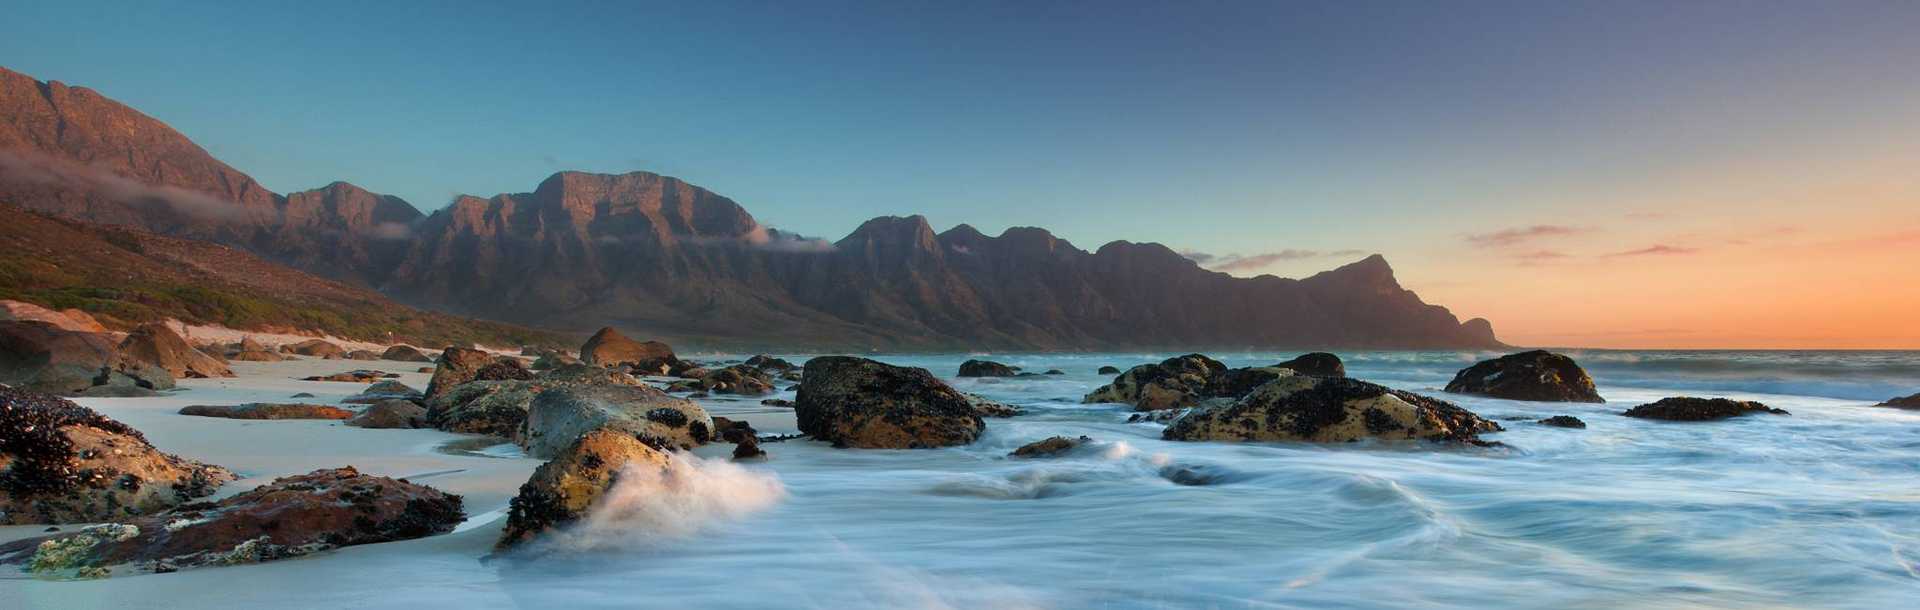 The sun sets over Kogel Bay in the Cape Province, South Africa